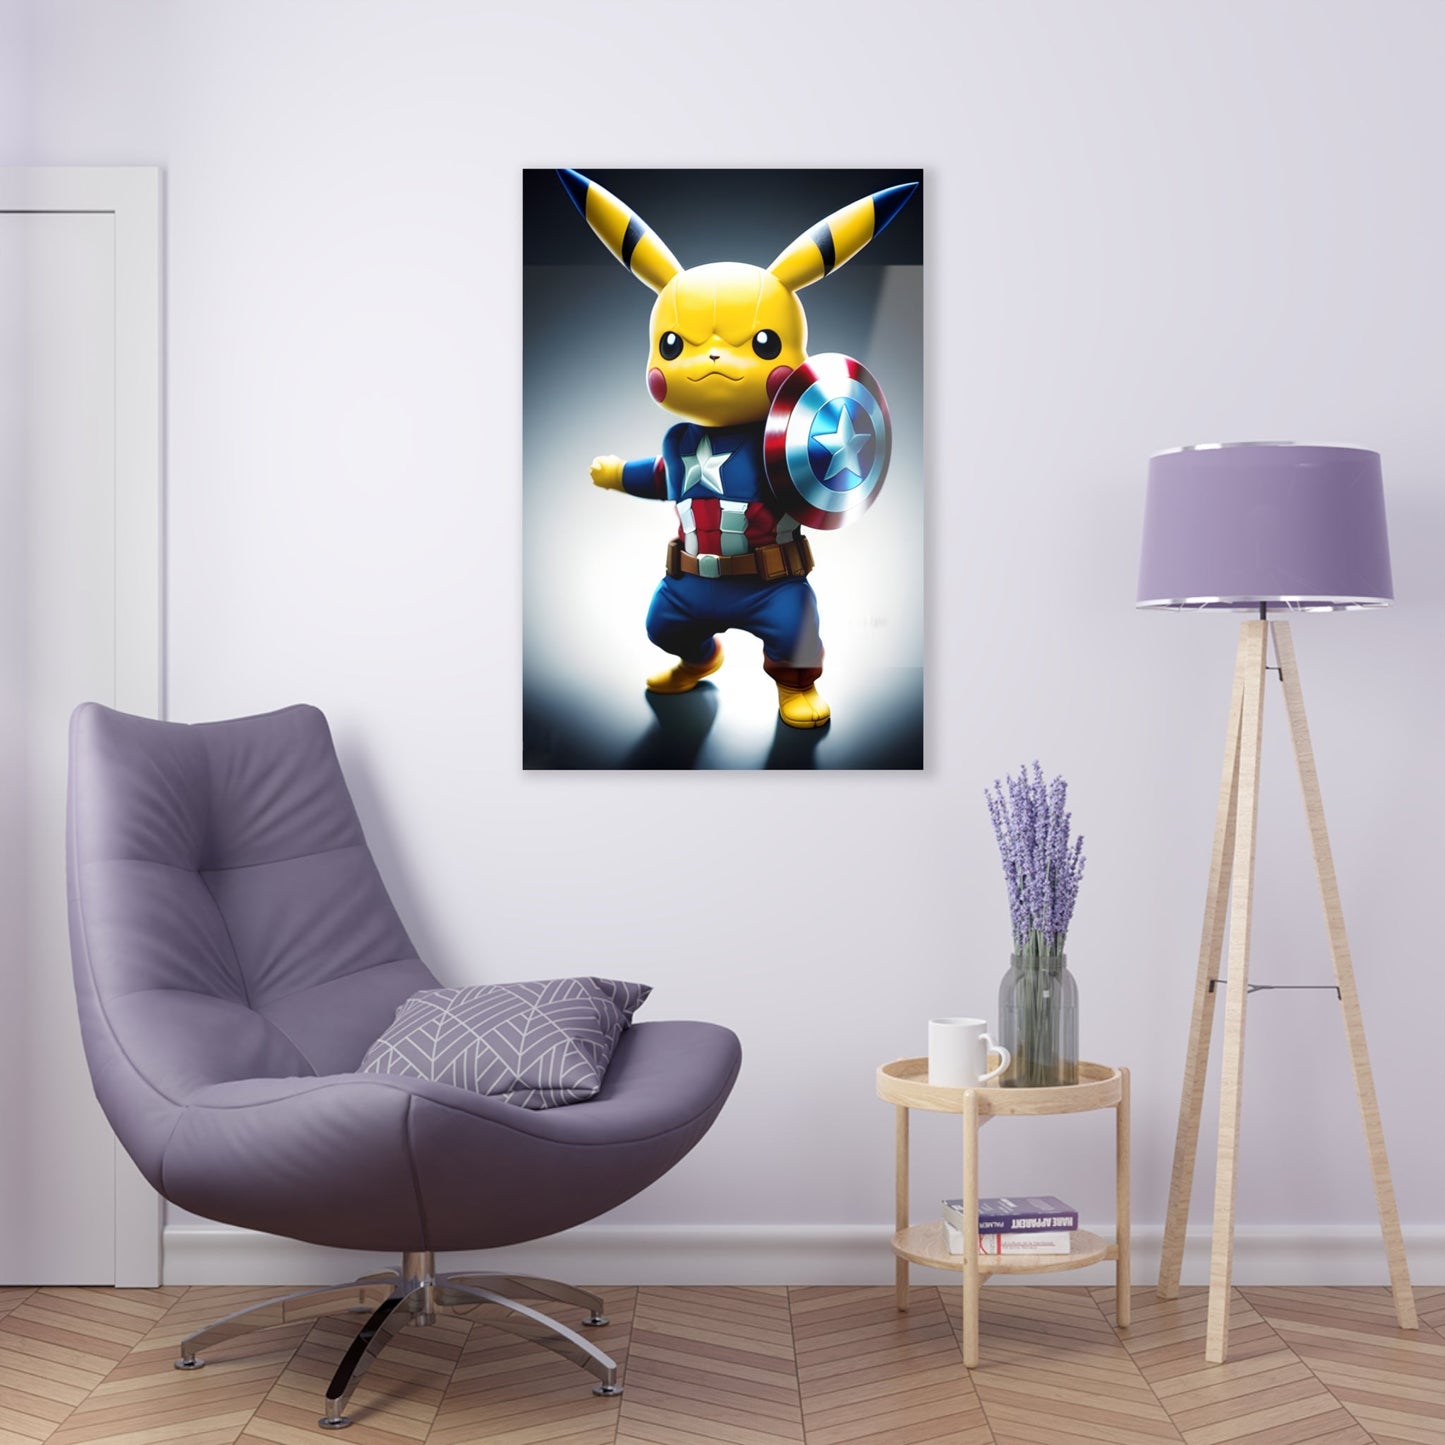 Acrylic print of Captain Americhu 3 hanging on a white door above a lavender chair, with a coordinating lavender-shaded lamp and a round coffee table featuring a coffee mug and lavender plant in a mason jar.